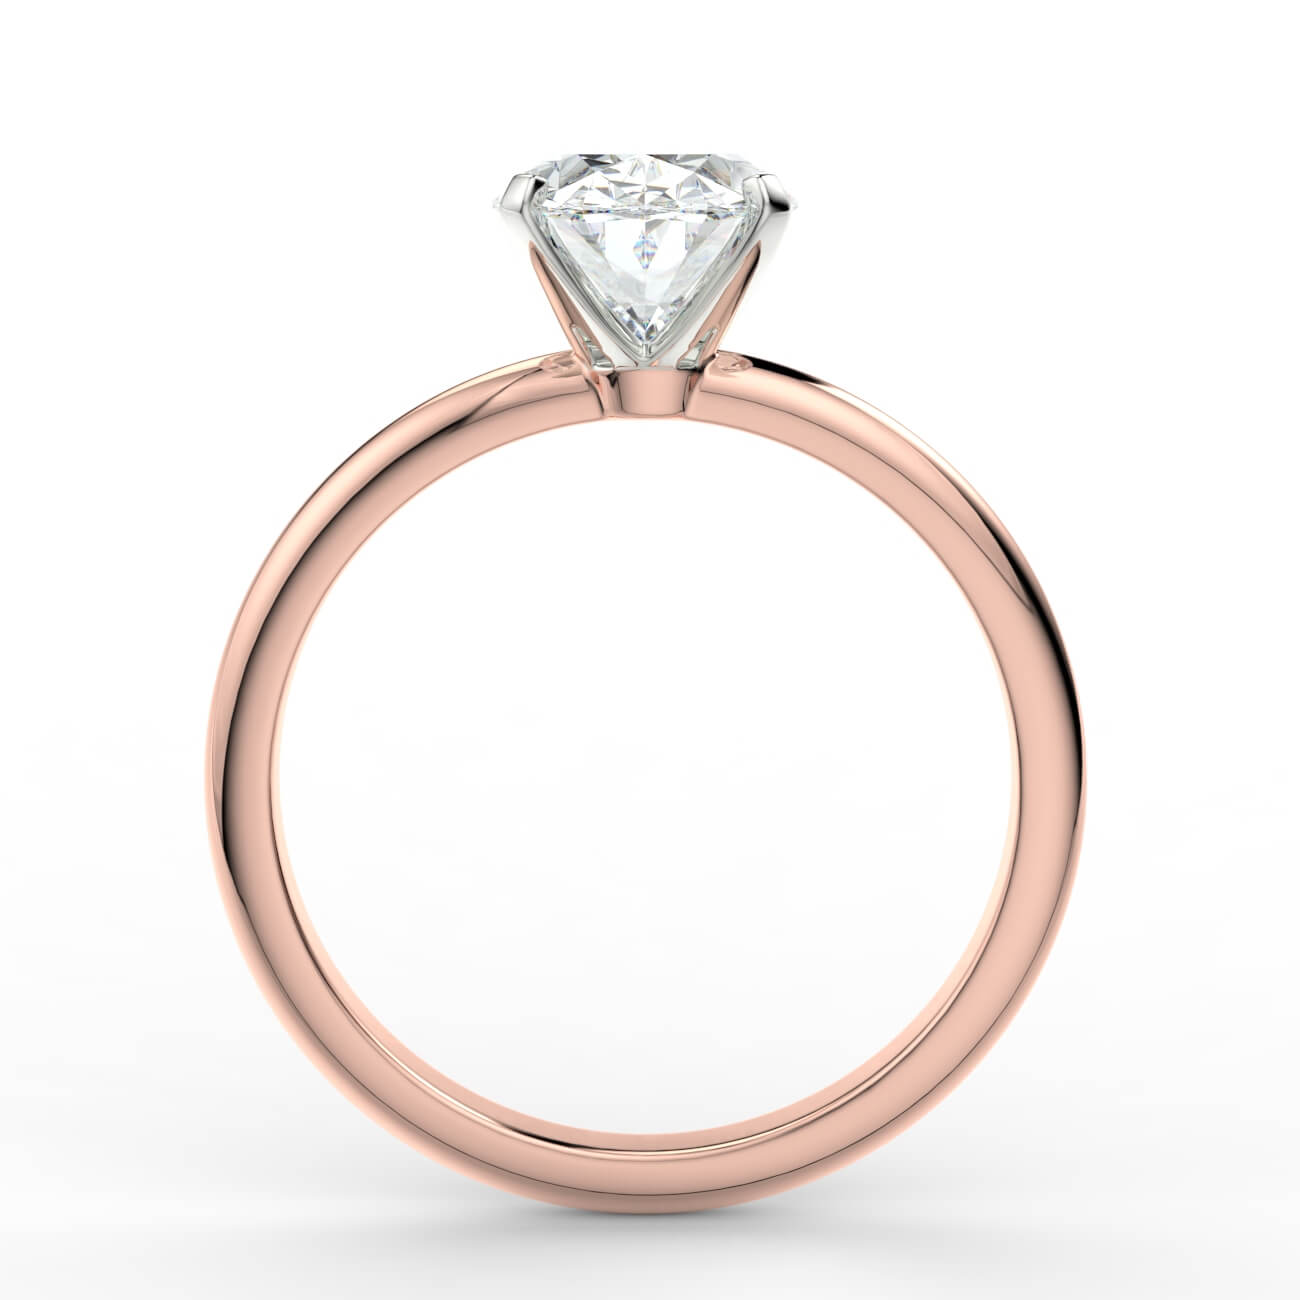 Knife-edge solitaire oval diamond engagement ring in rose and white gold – Australian Diamond Network